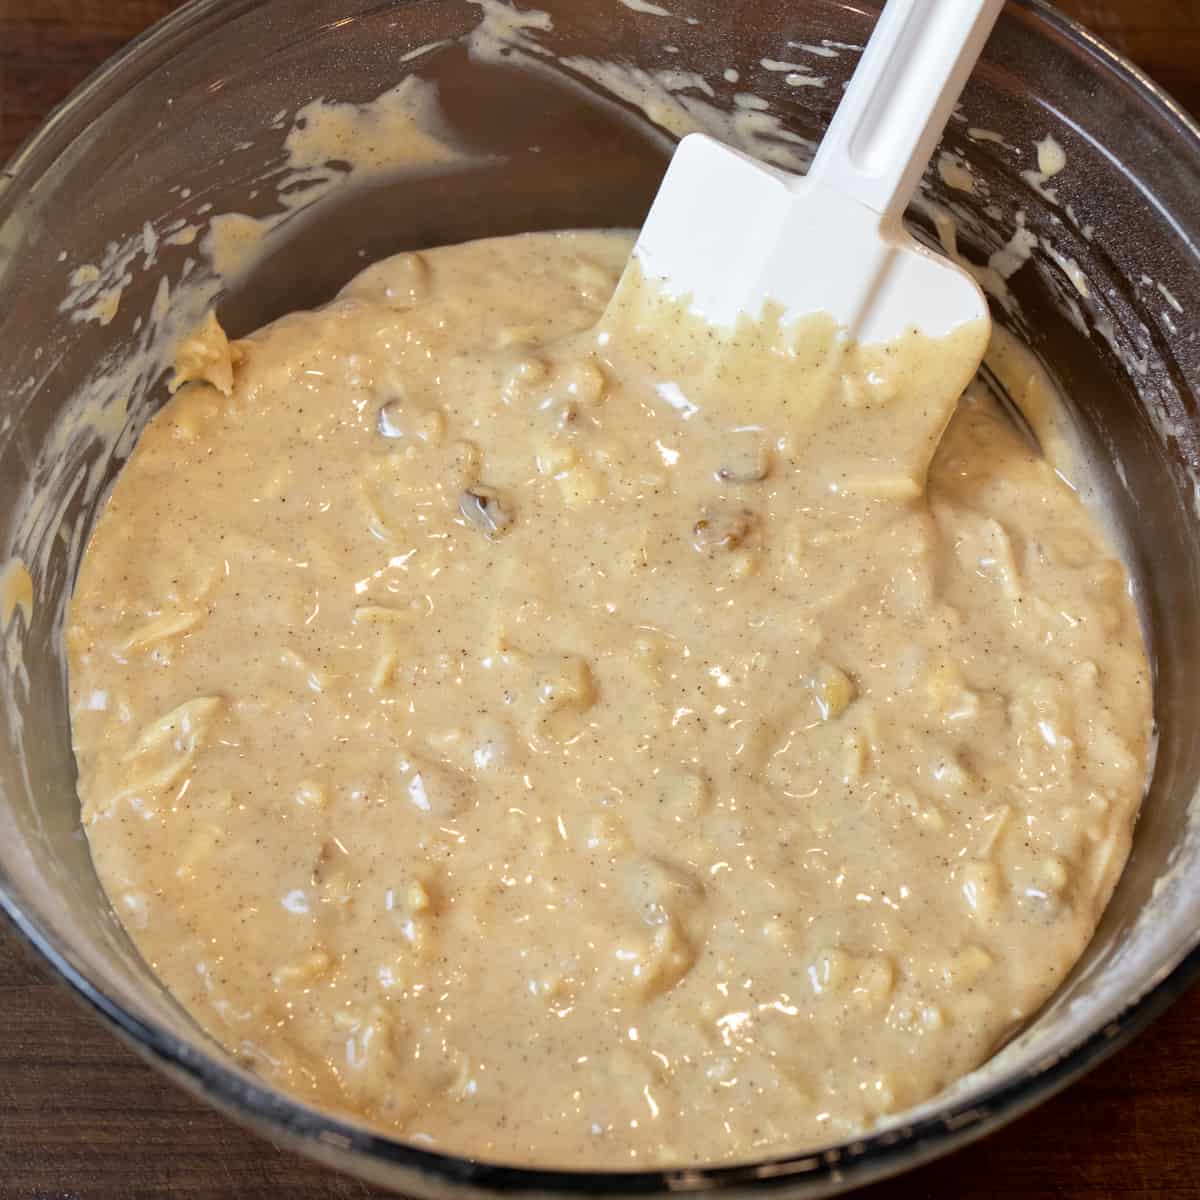 Parsnip batter in a glass bowl.